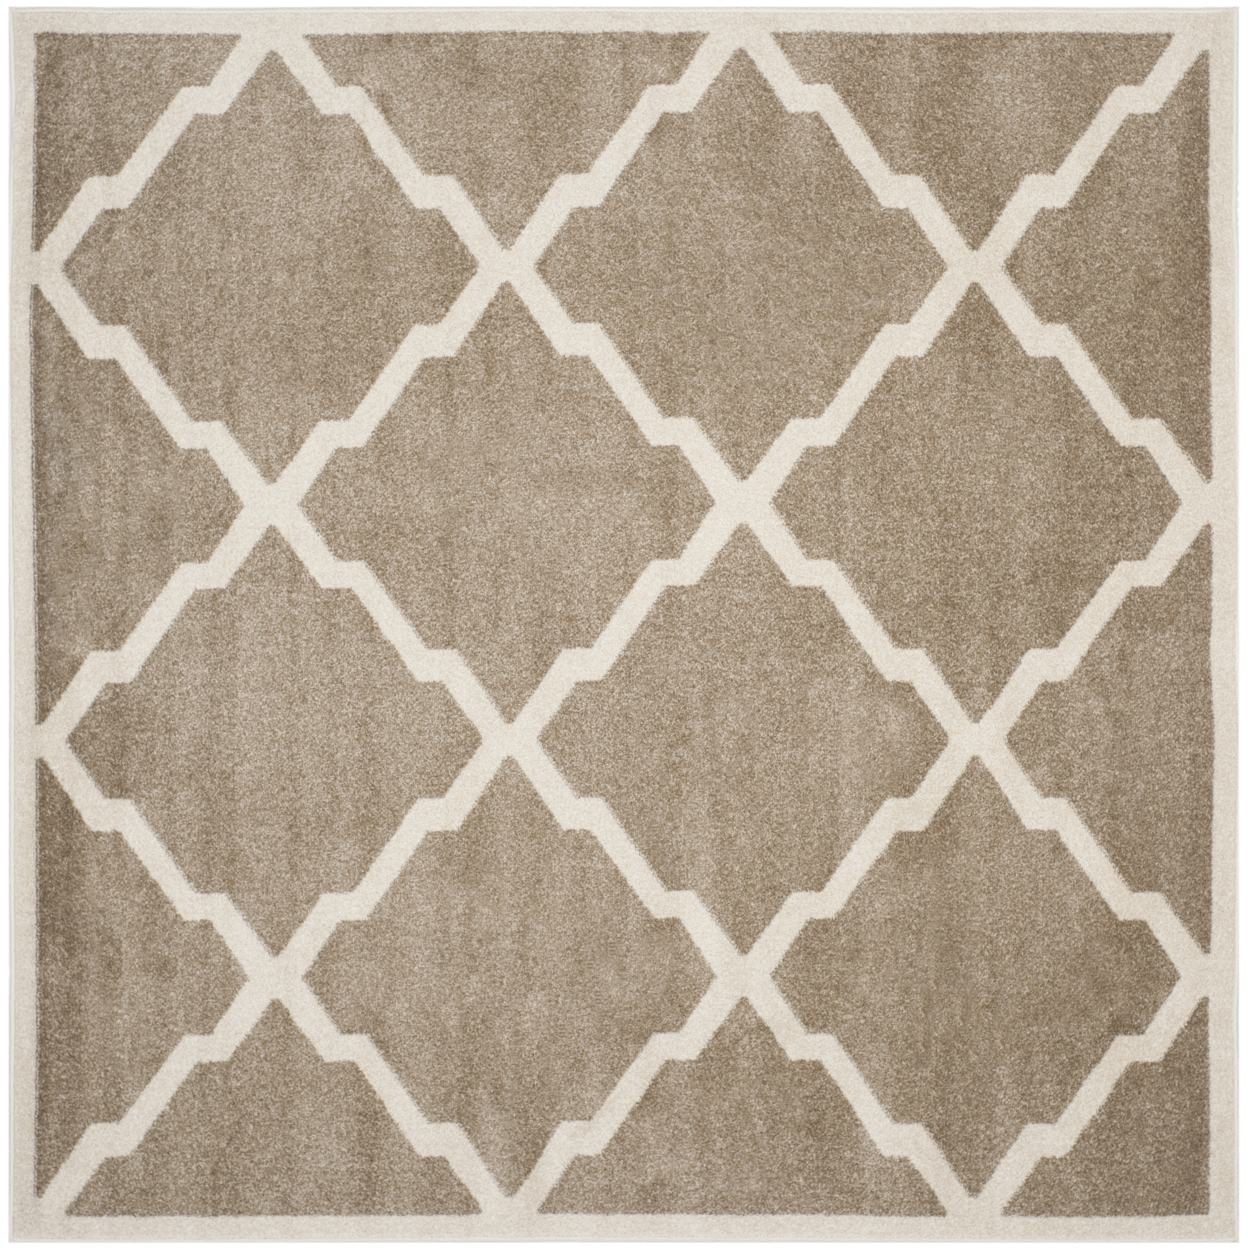 SAFAVIEH Amherst Collection AMT421S Wheat / Beige Rug - 7' Square